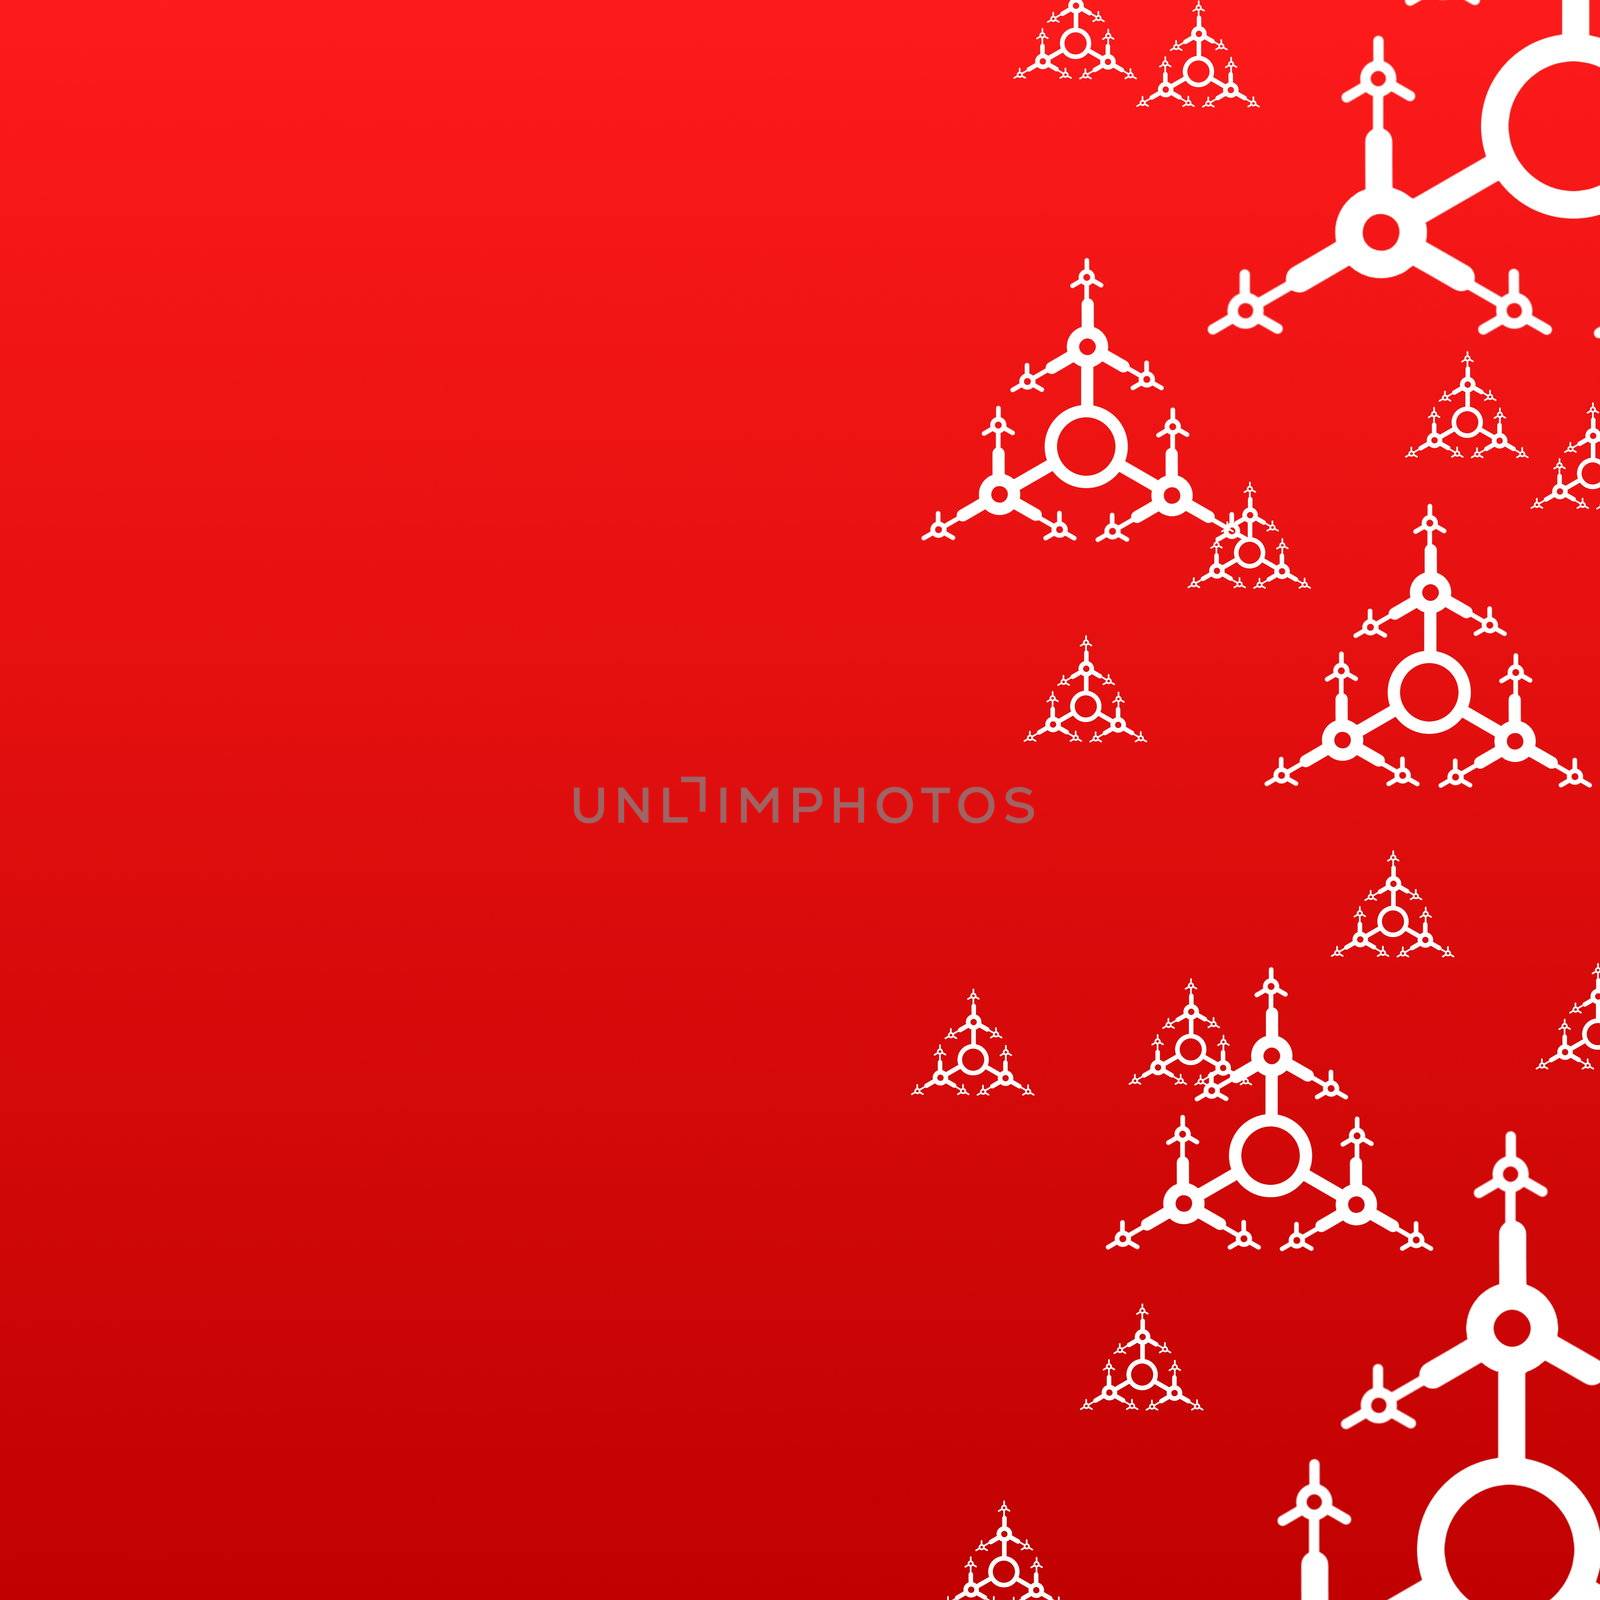 red xmas background with copyspace for text message